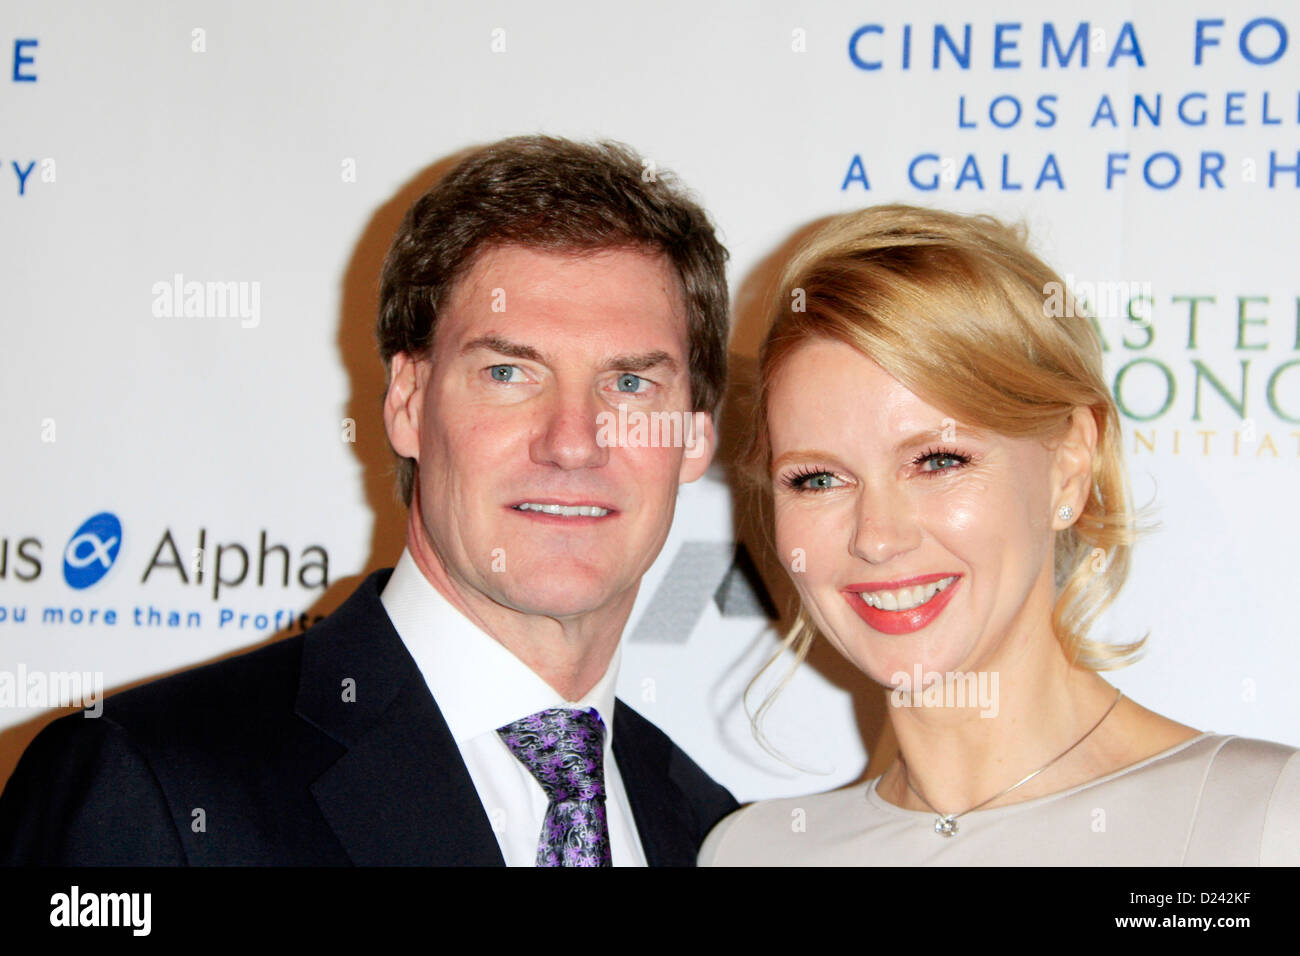 Veronica Ferres and Carsten Maschmeyer attend the Cinema For Peace Foundation's 2013 Gala For Humanity at Beverly Hills Hotel on January 11, 2013 in Beverly Hills, California. Stock Photo